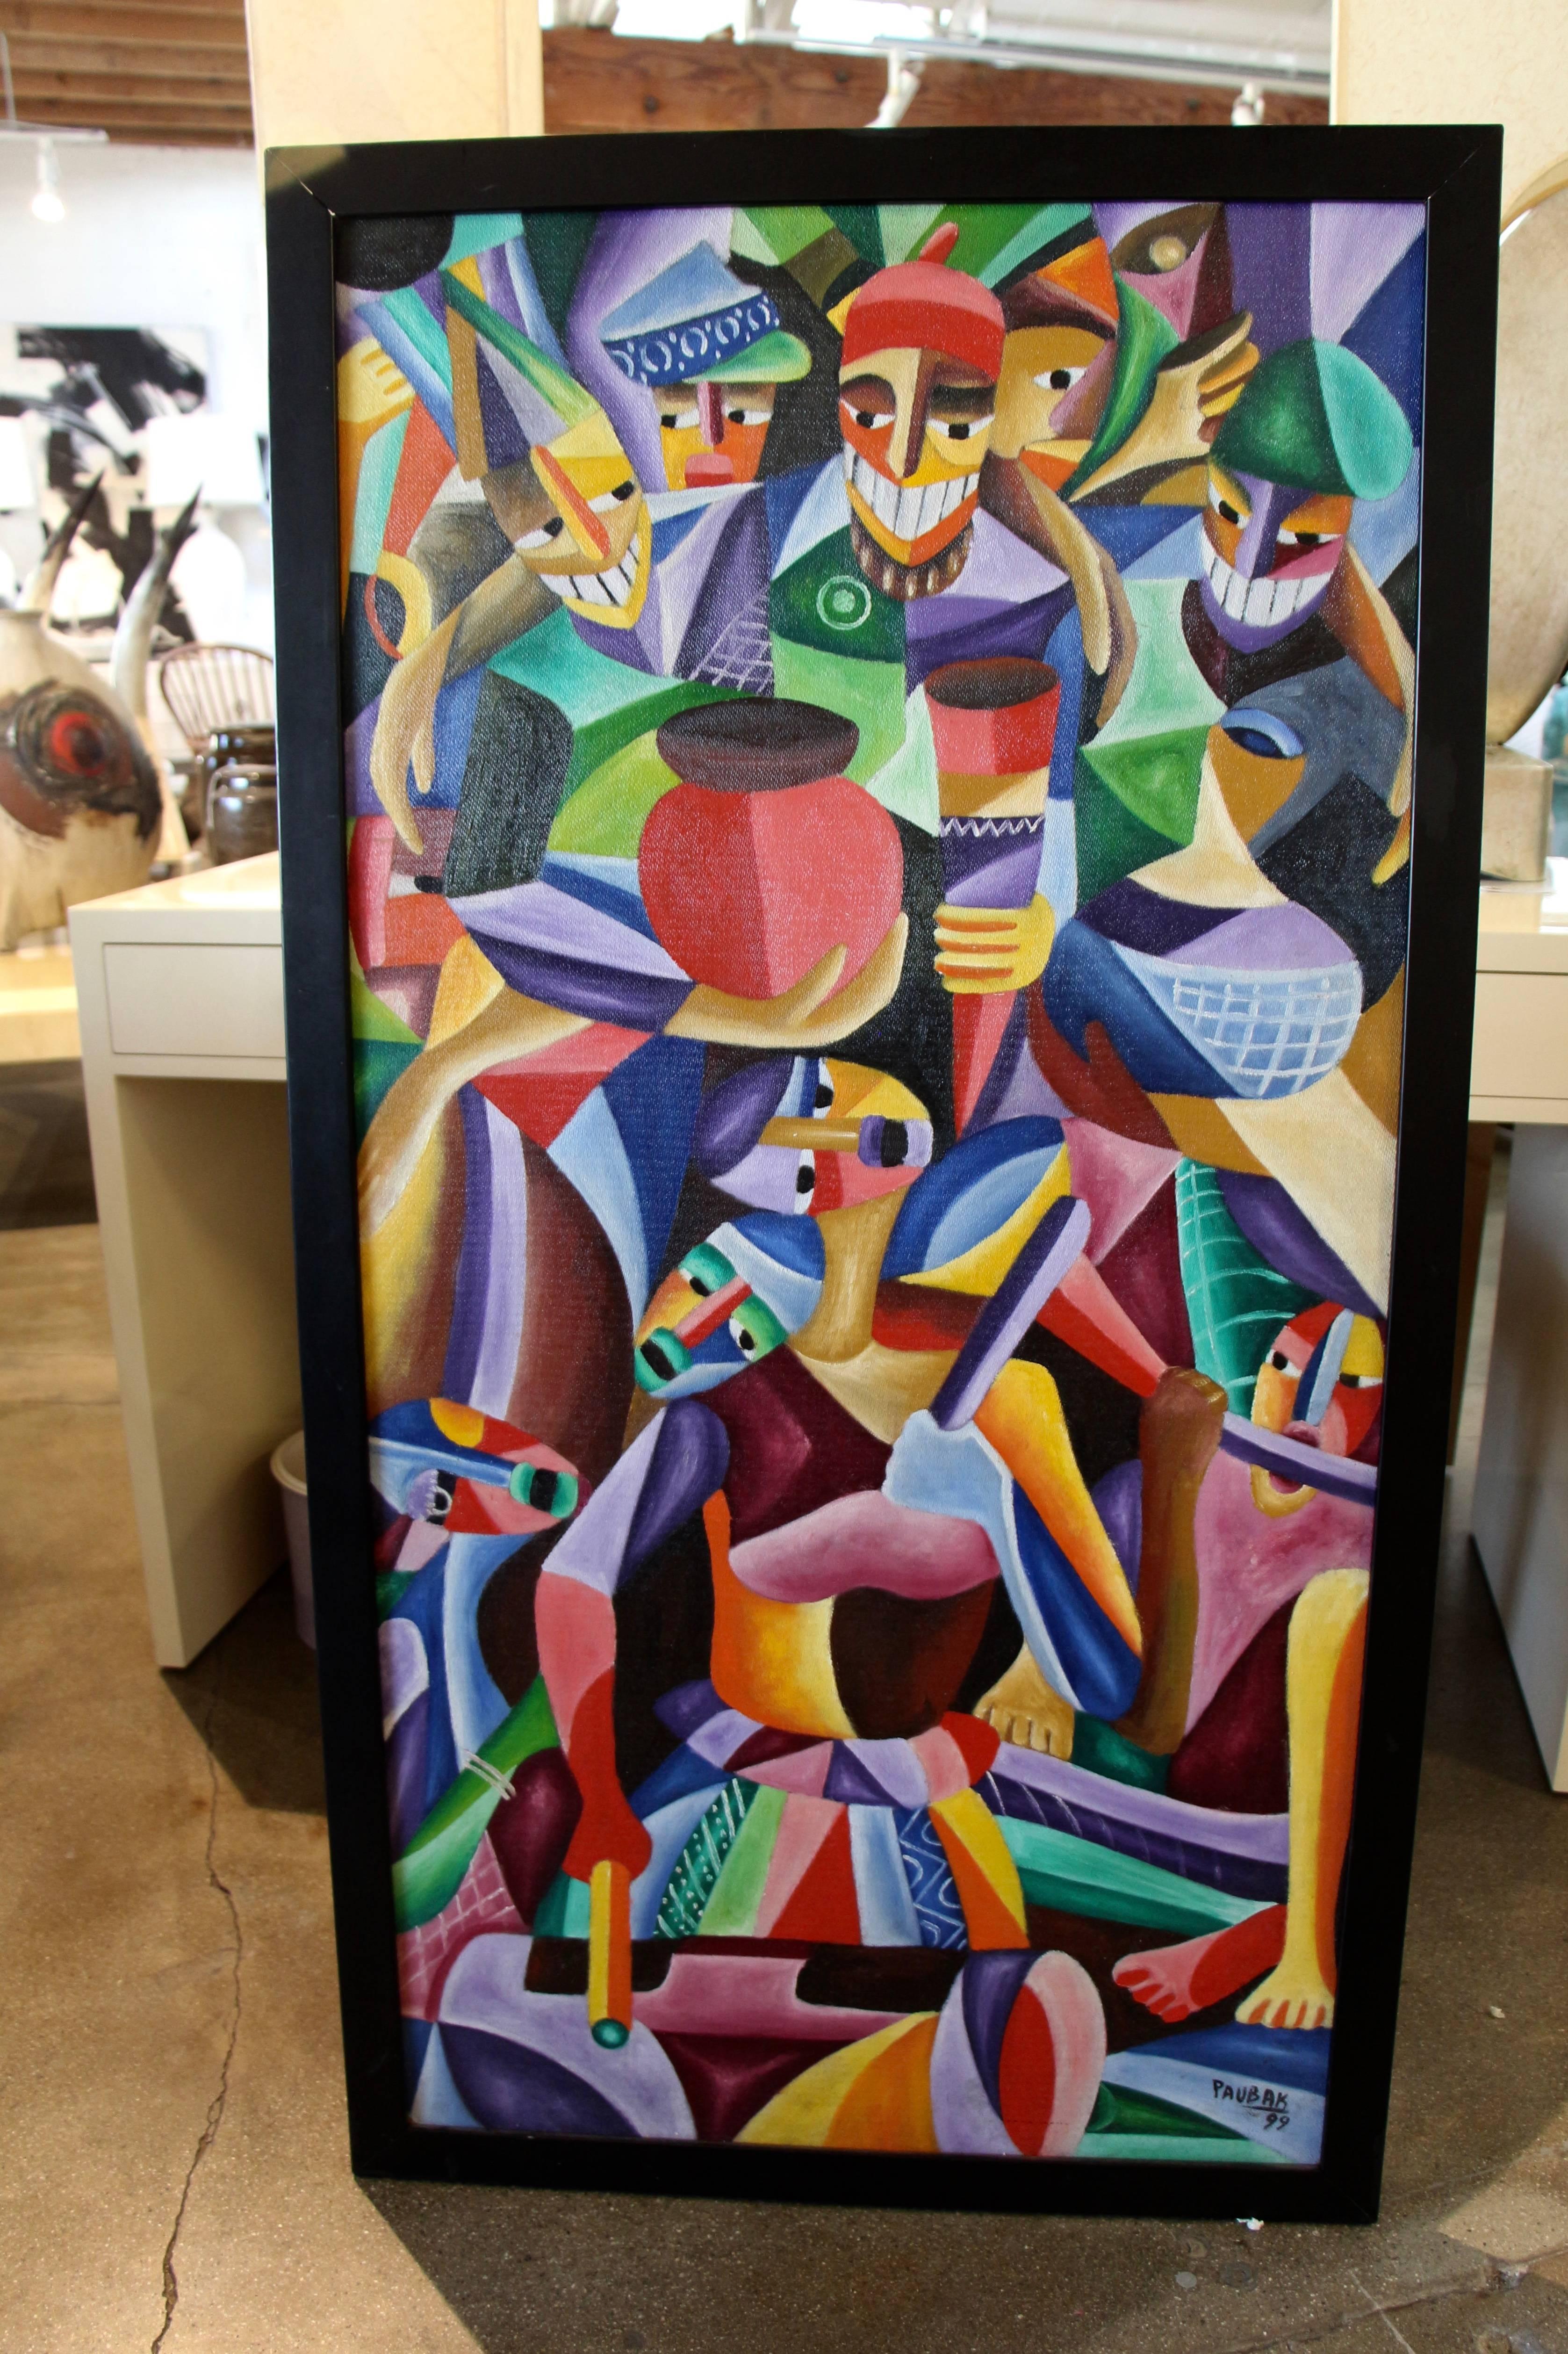 A nice vibrant cubist painting signed Paubak. Painted on board. It is framed in a simple black frame that has losses and has been retouched in areas. The corners of the frame do not meet flush. Minor losses to the paint.